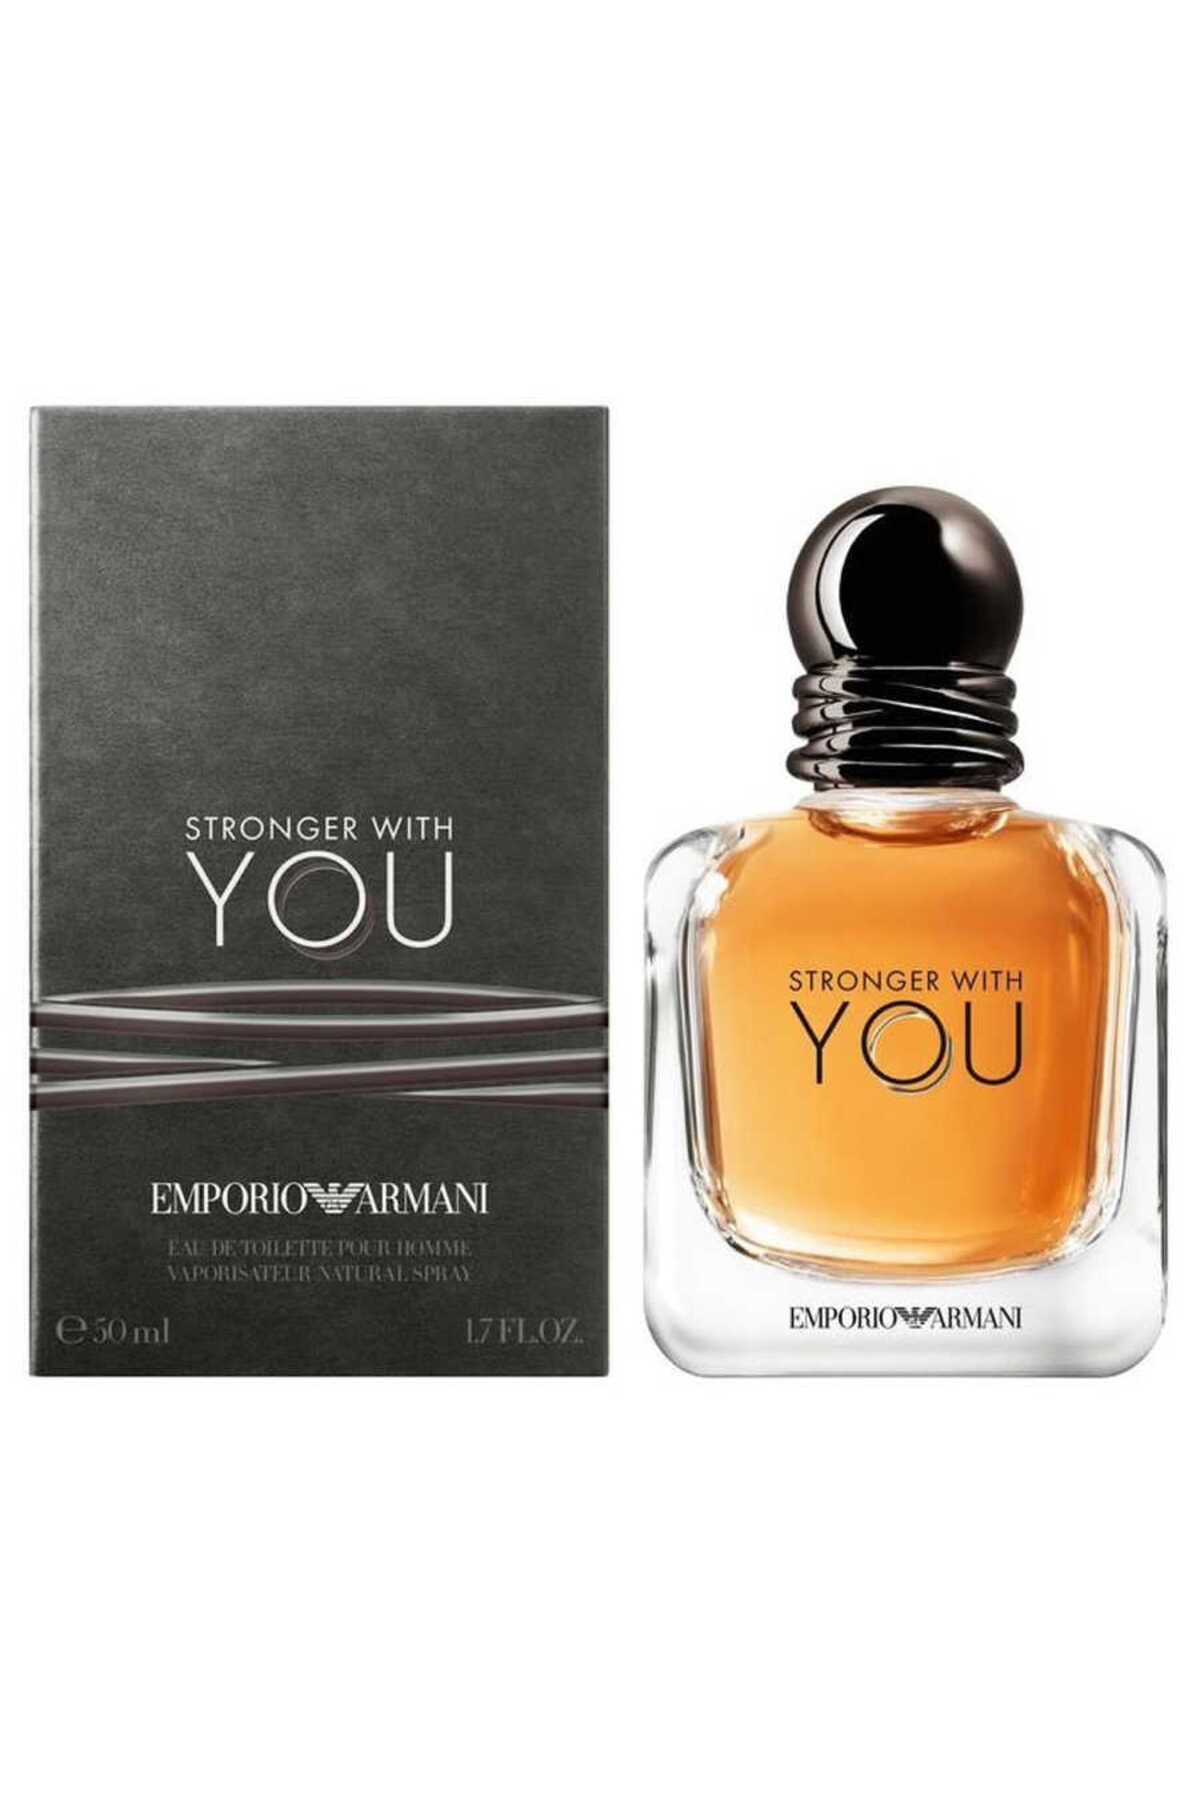 Emporio Armani stronger with you intensely 100 мл. Туалетная вода Armani Emporio Armani stronger with you. Giorgio Armani Emporio Armani stronger with you. Giorgio Armani stronger with you intensely. Туалетная вода strong